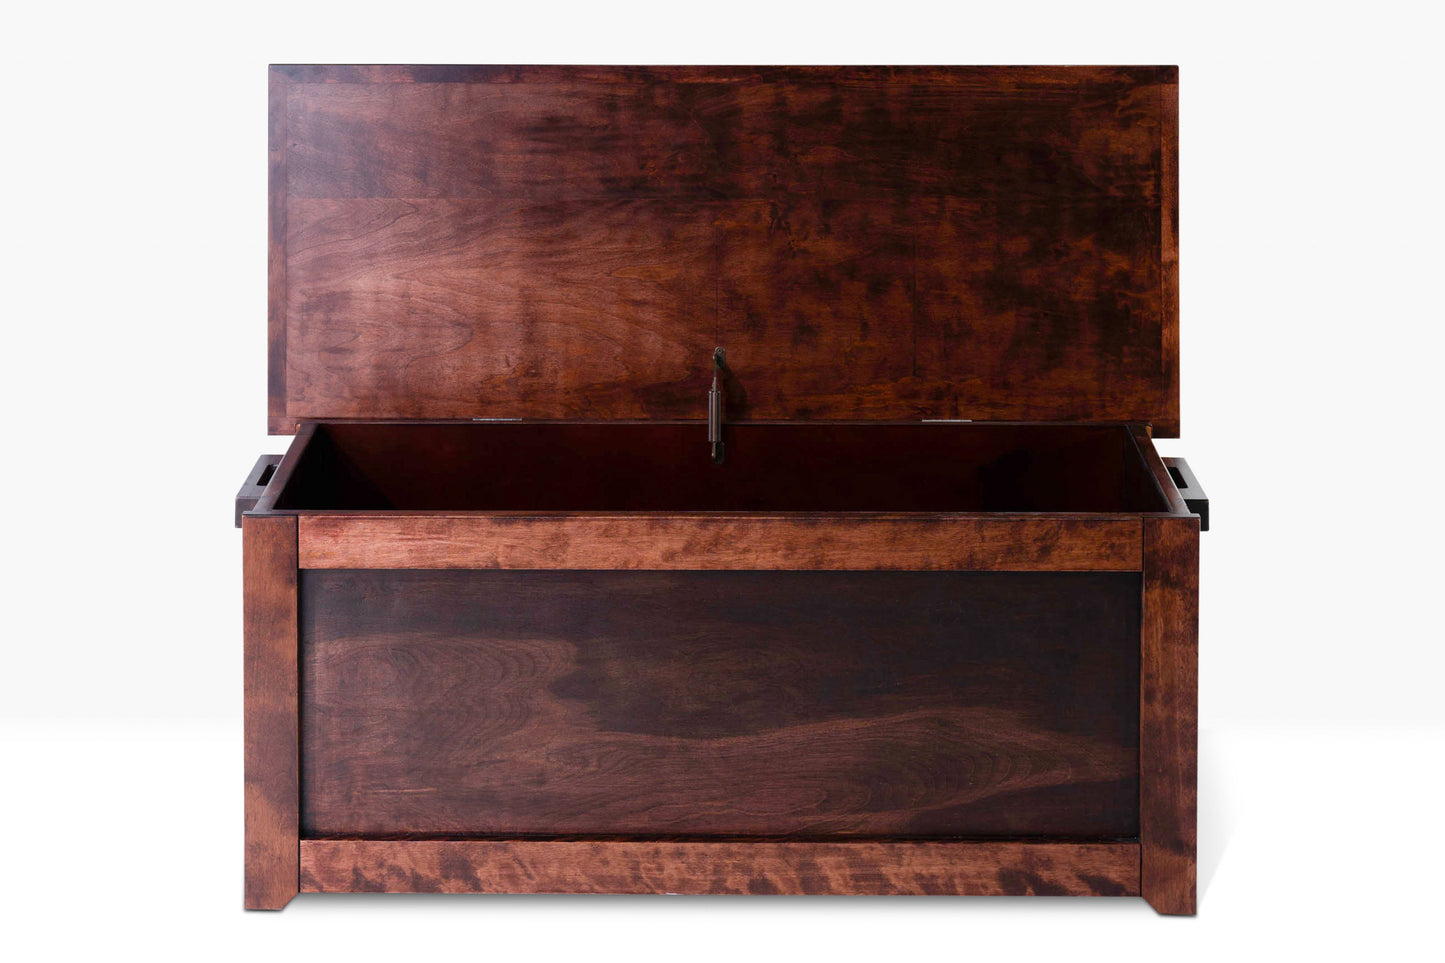 Berkshire Blanket Chest is built in birch and shown open in Nutmeg finish.